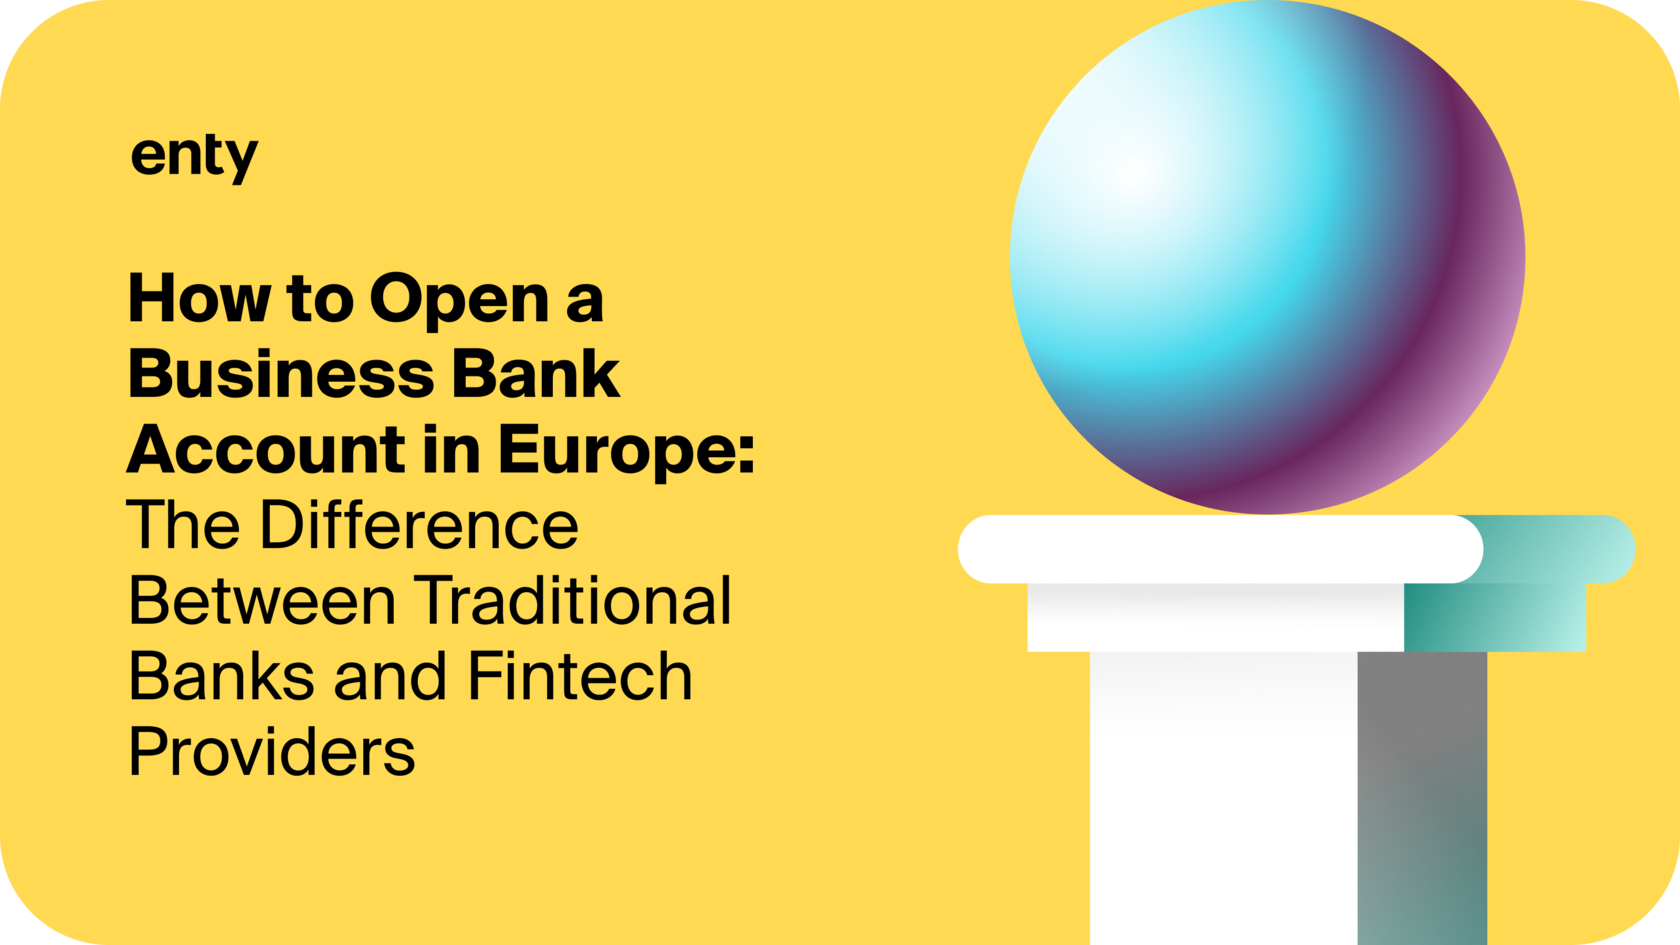 How to Open a Business Bank Account in Europe: the Difference